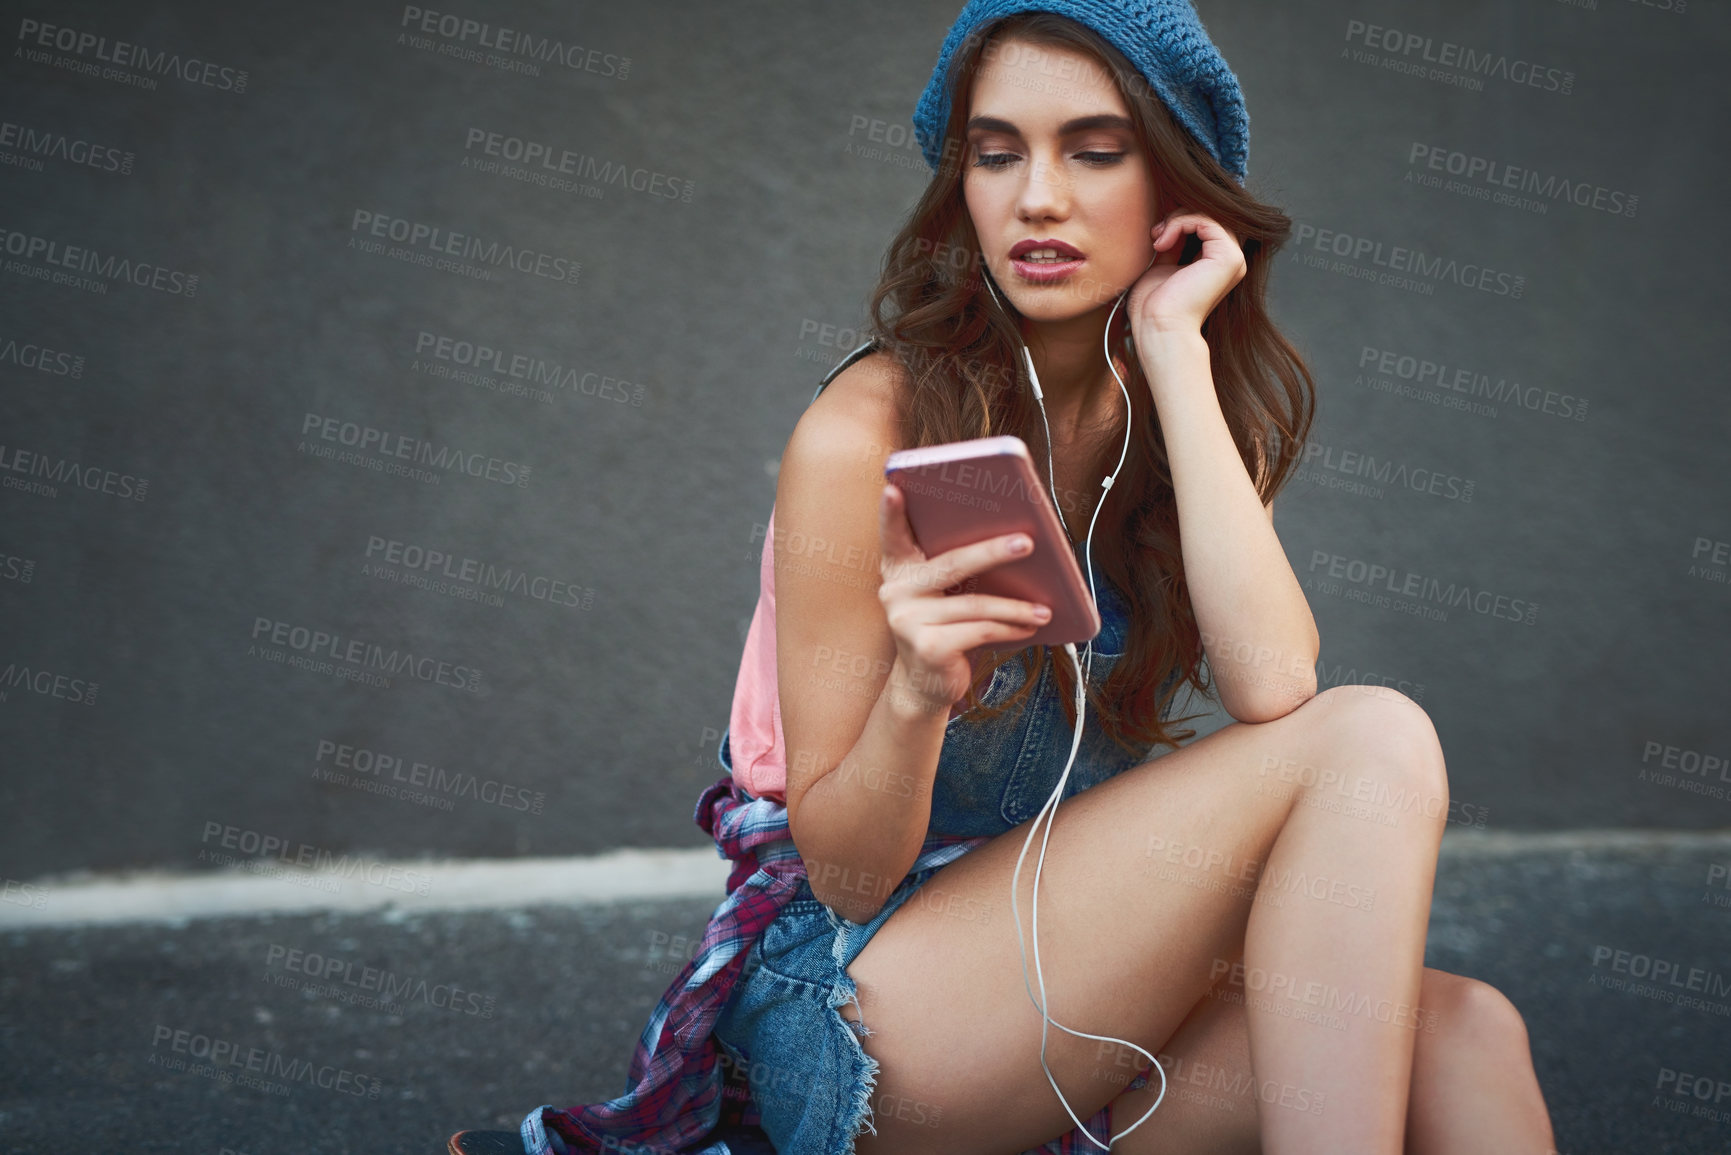 Buy stock photo Shot of a carefree young woman seated on the floor while listening to music through her earphones outside during the day